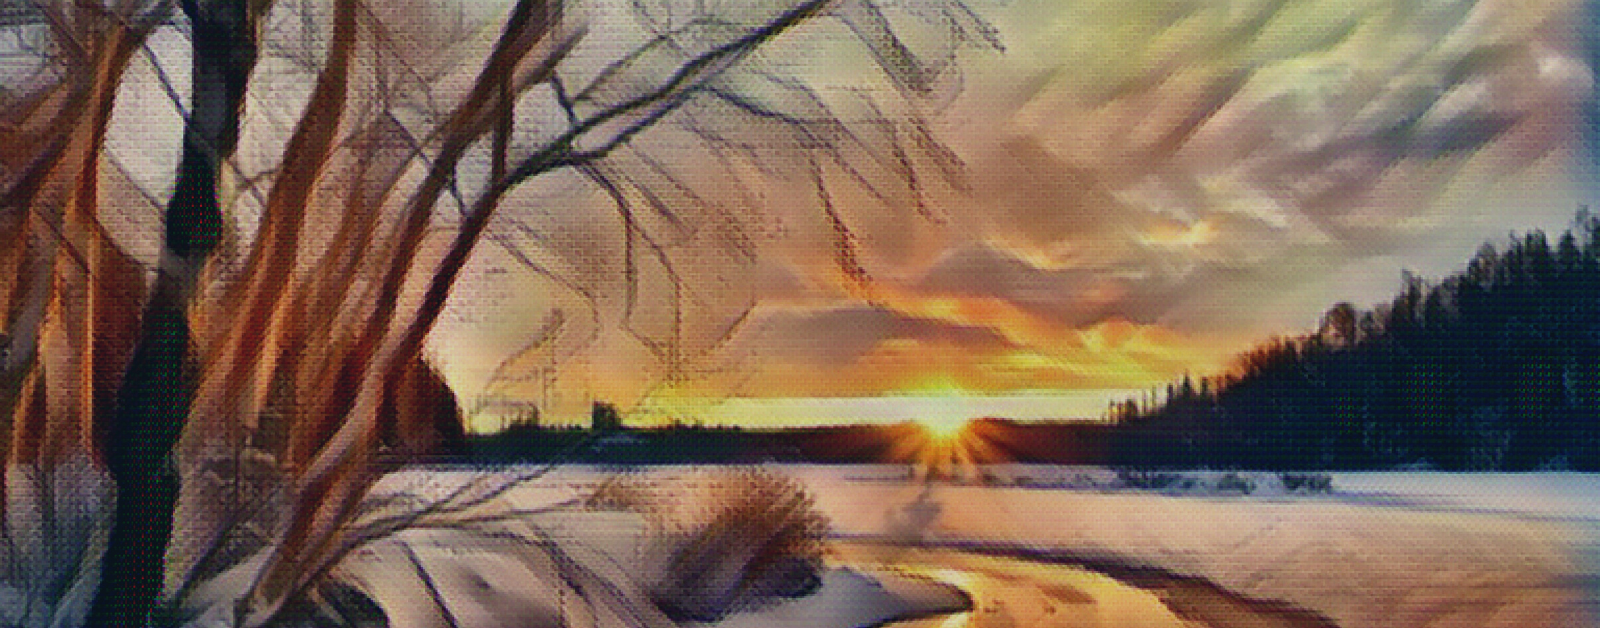 windel filter over a photo of a sunset over a snowy lake